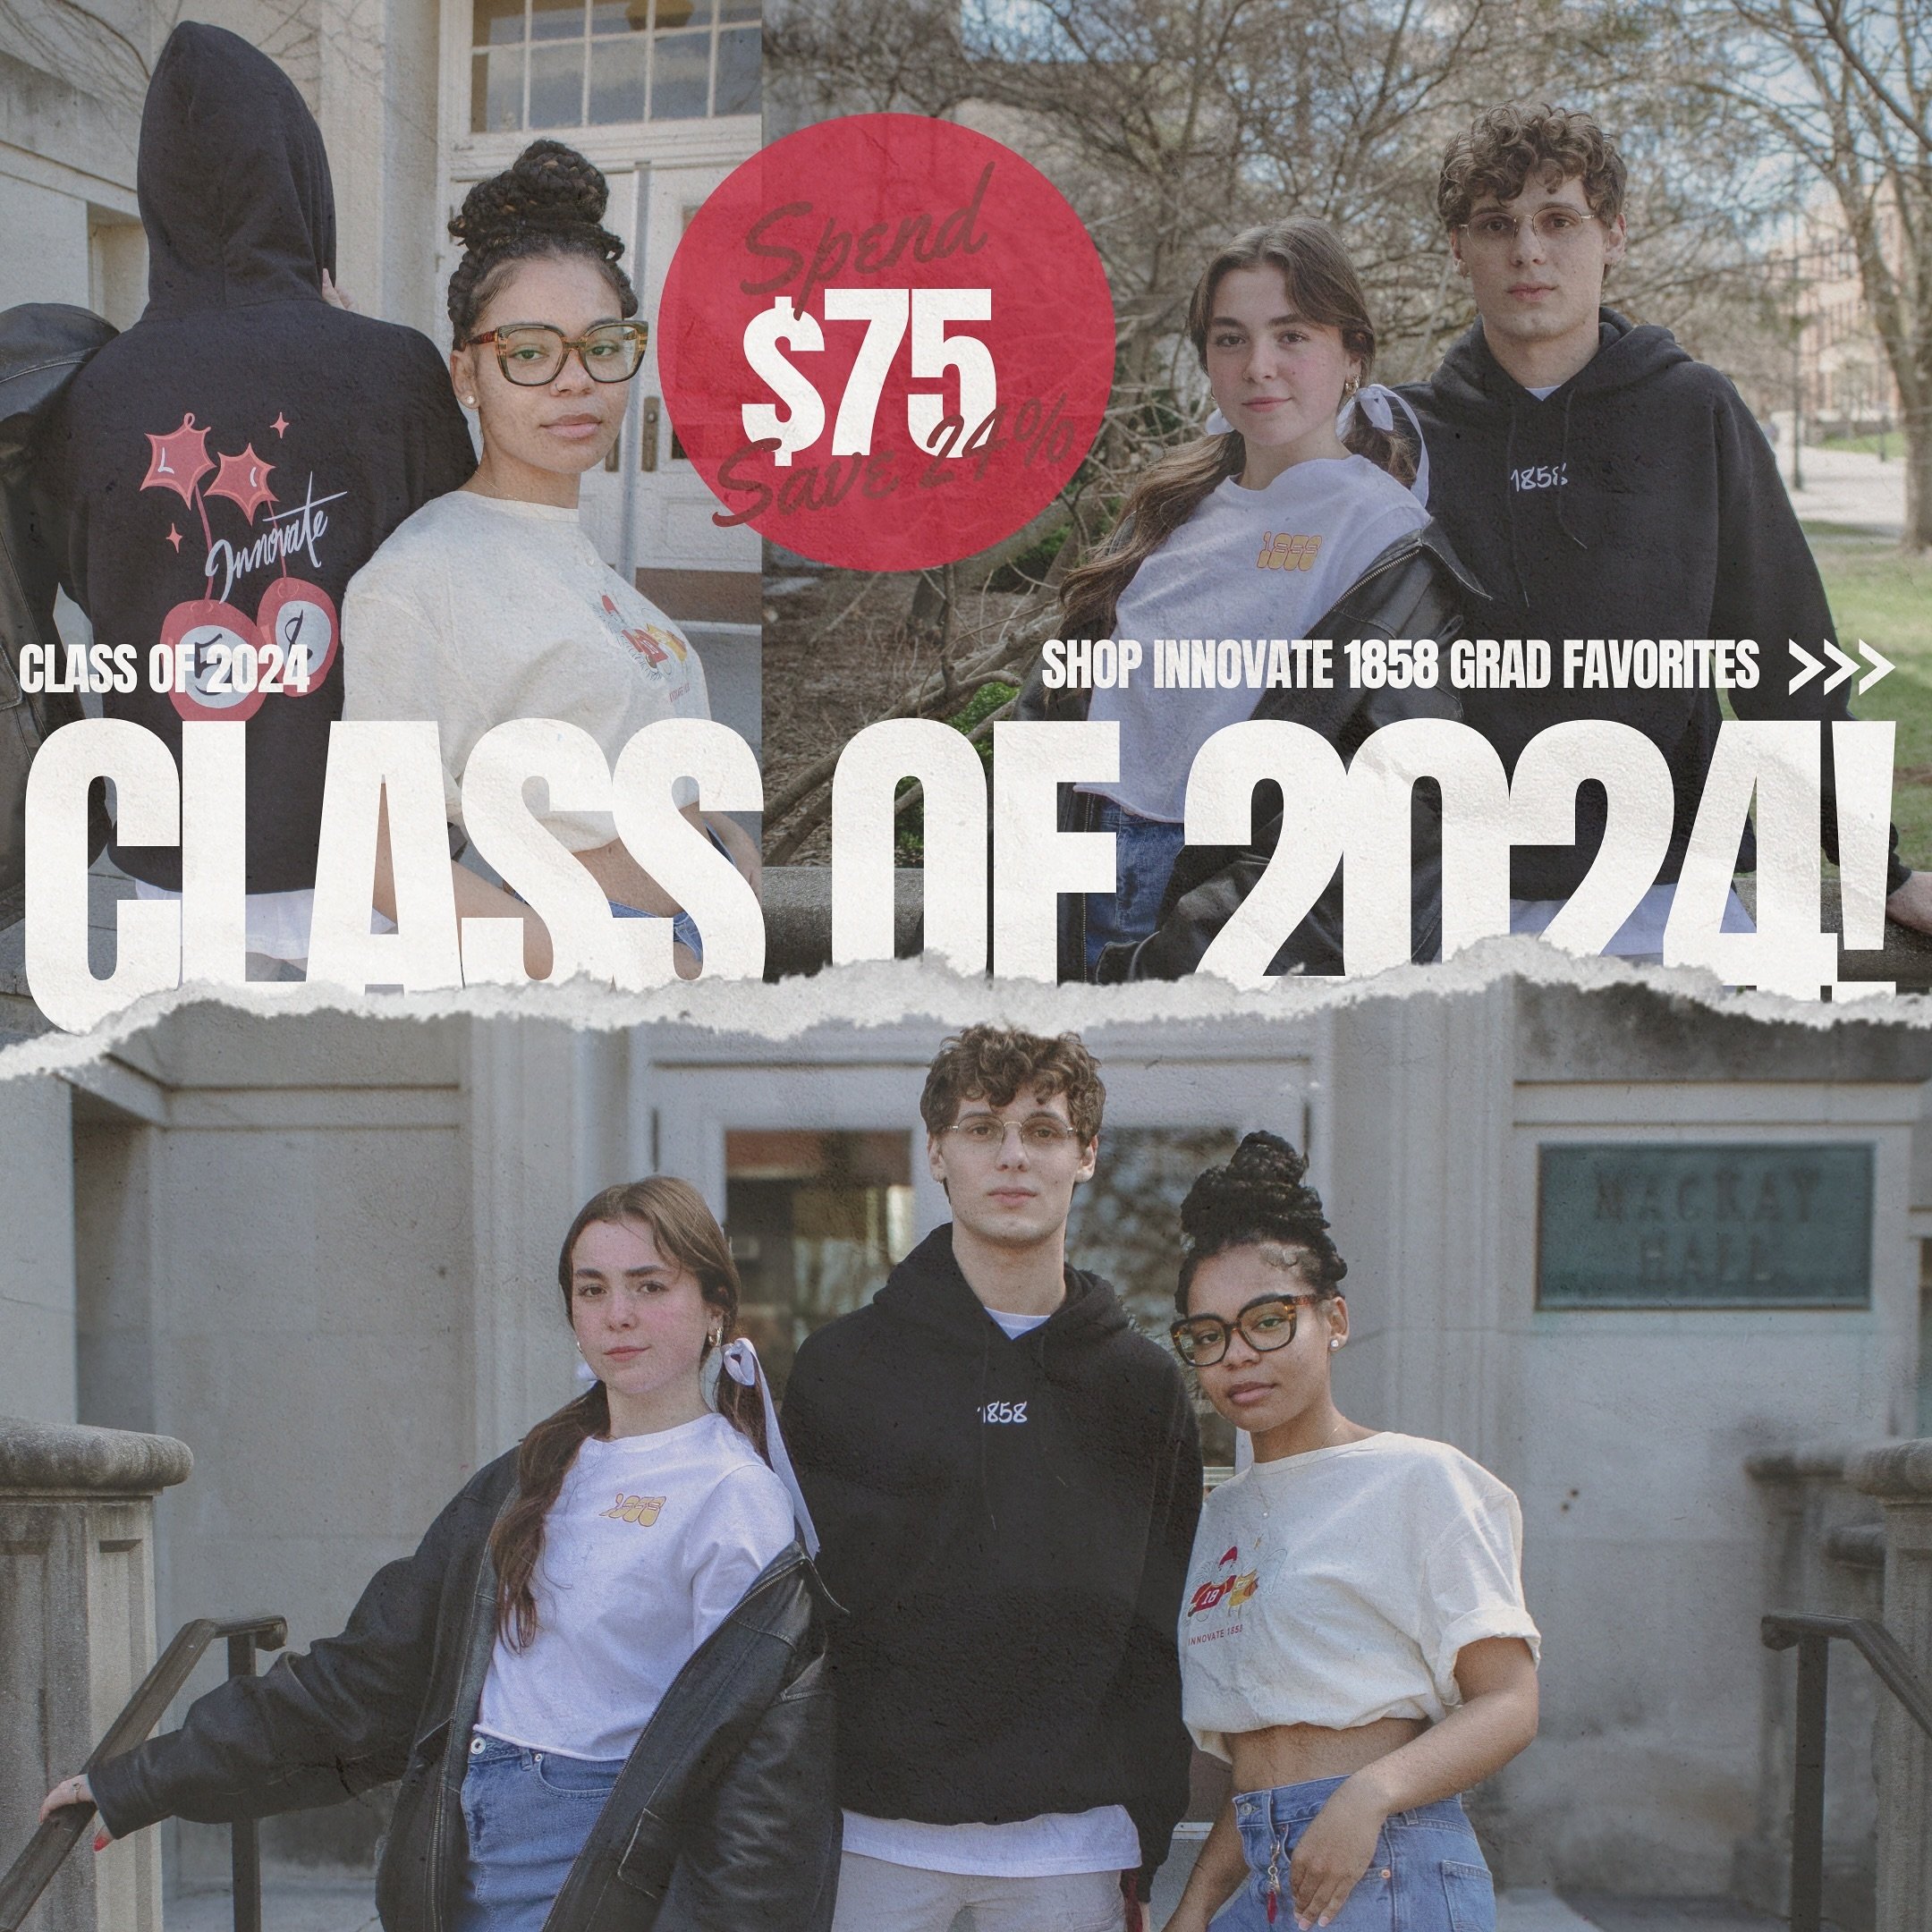 Congrats Class of 2024!! 🎓 Come into Innovate to save 24% on your purchase of $75 or more ✨

Code for online orders: SENIOR24

#Innovate1858 #ForCyclonesByCyclones #Classof2024 #Graduation #SeniorSendOff